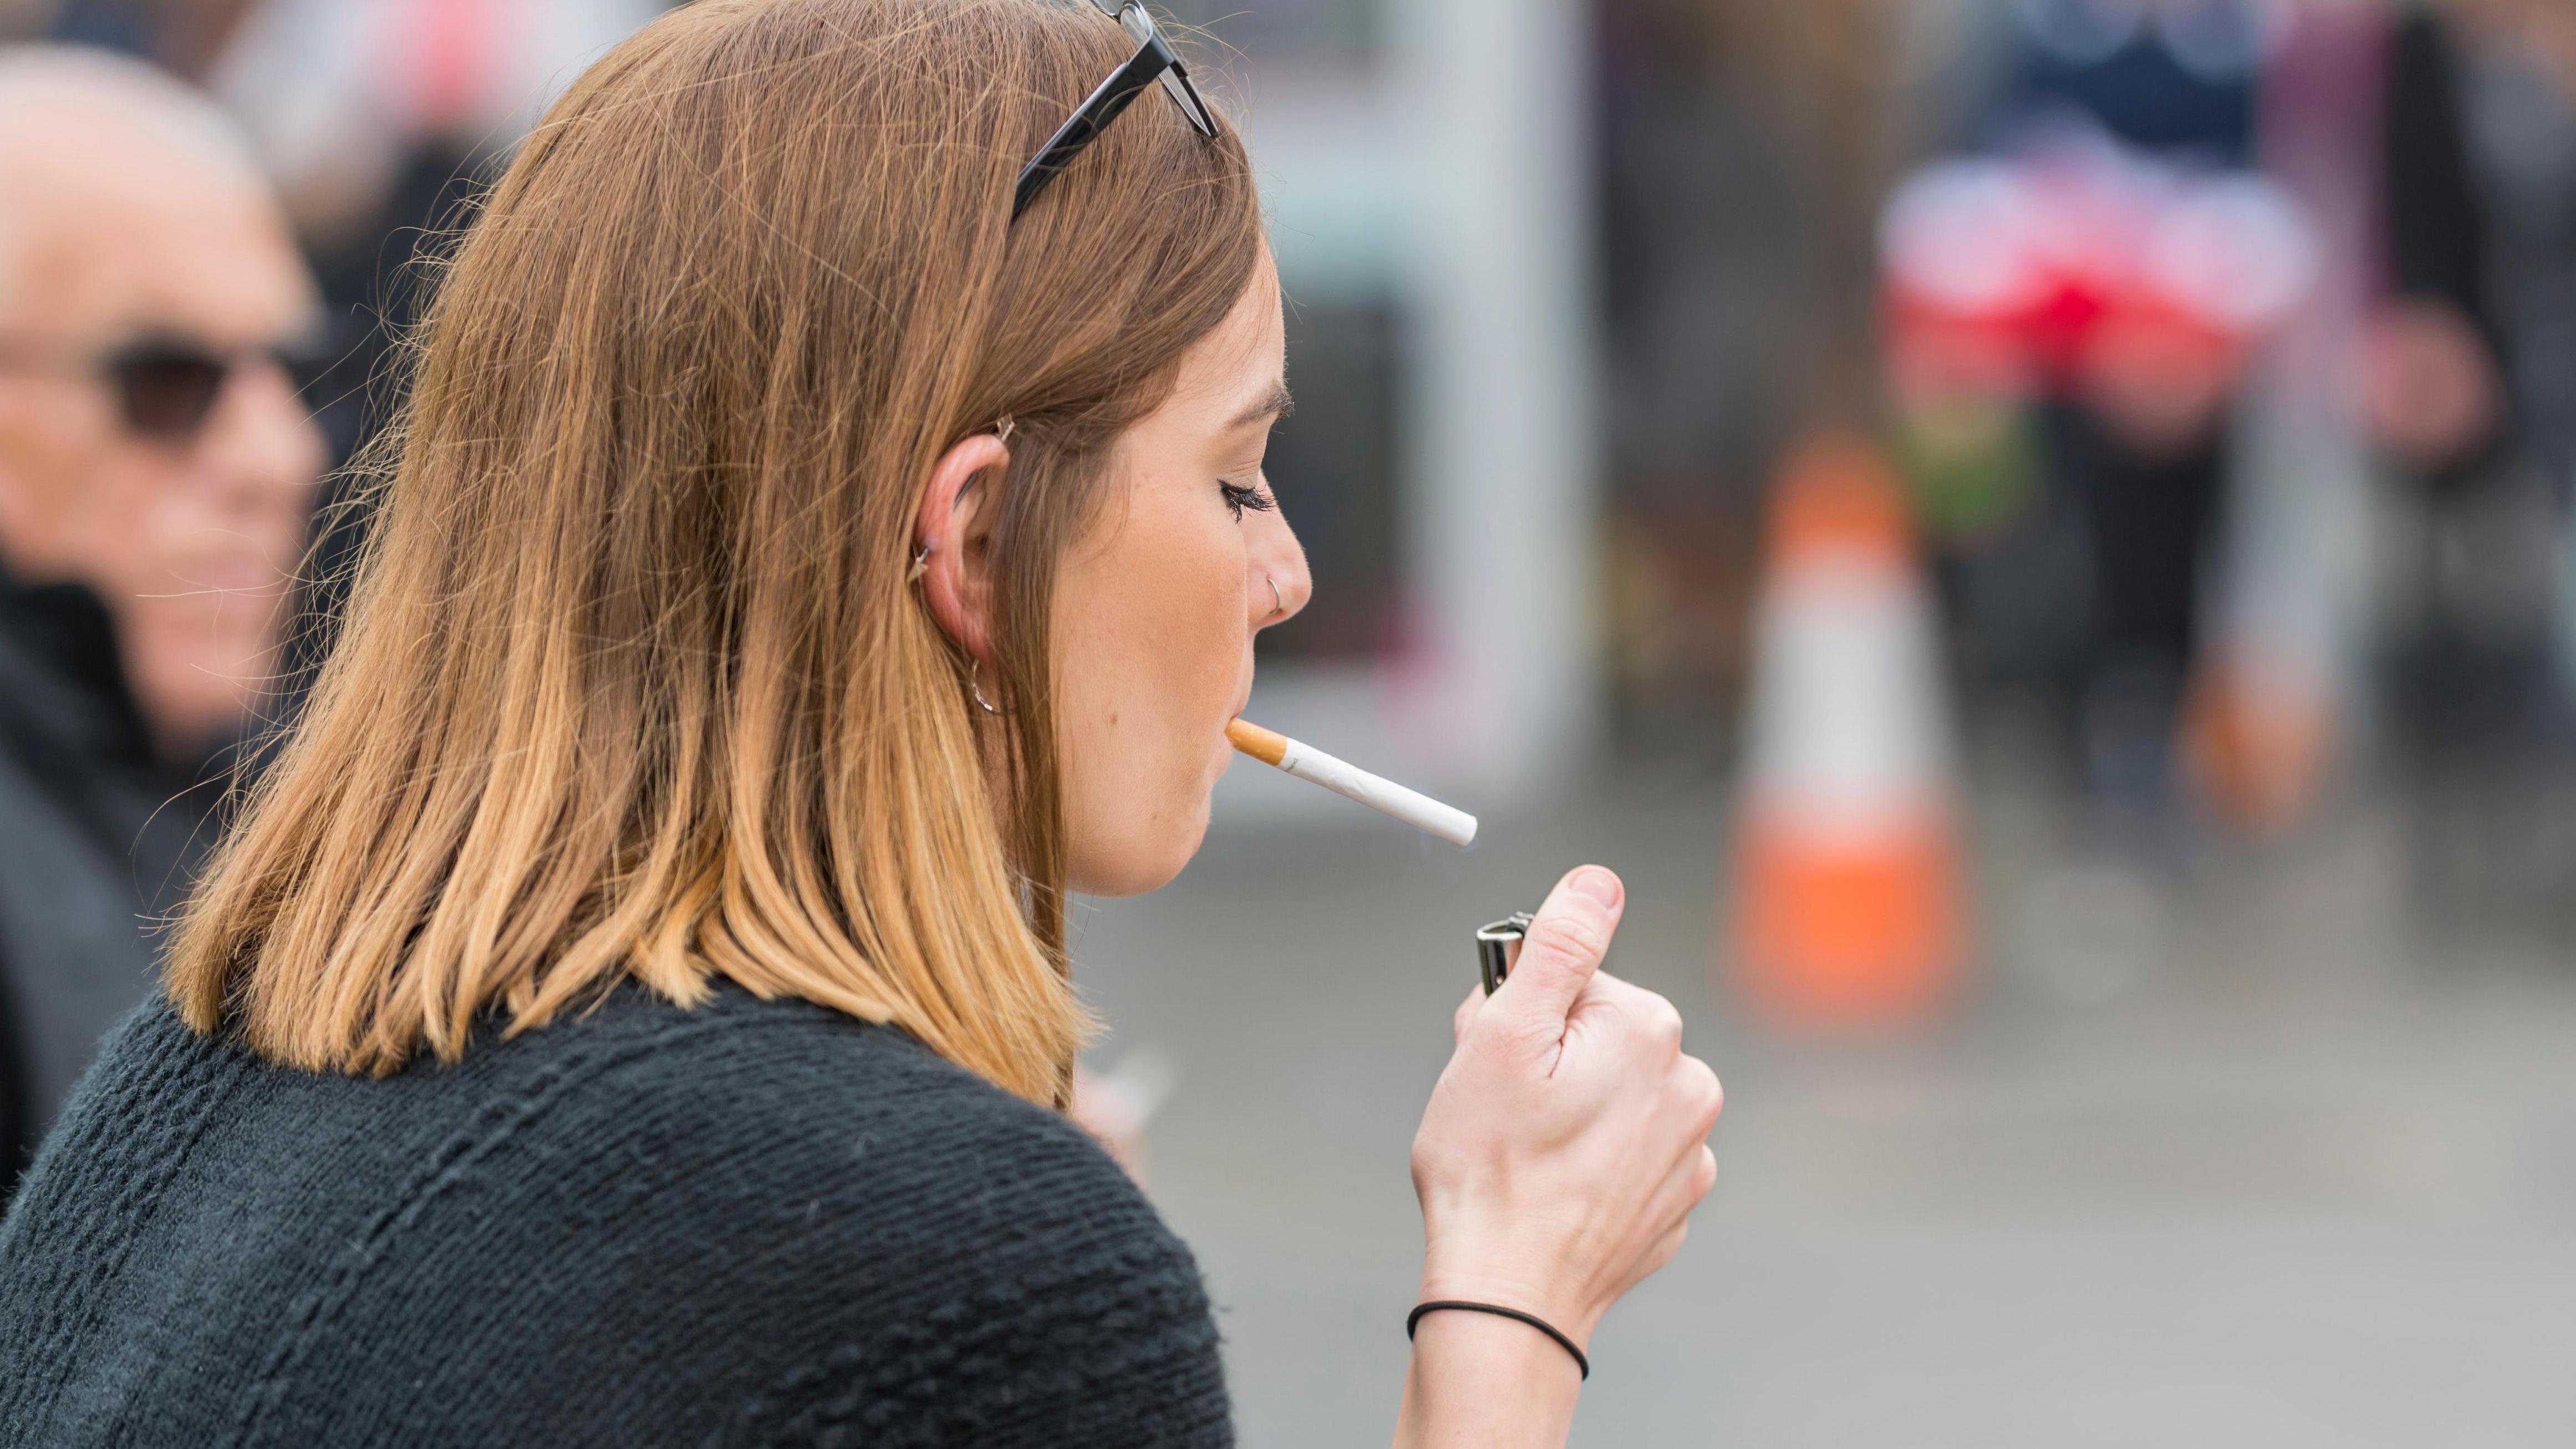 Ten million fewer cigarettes will be smoked each day by 2040